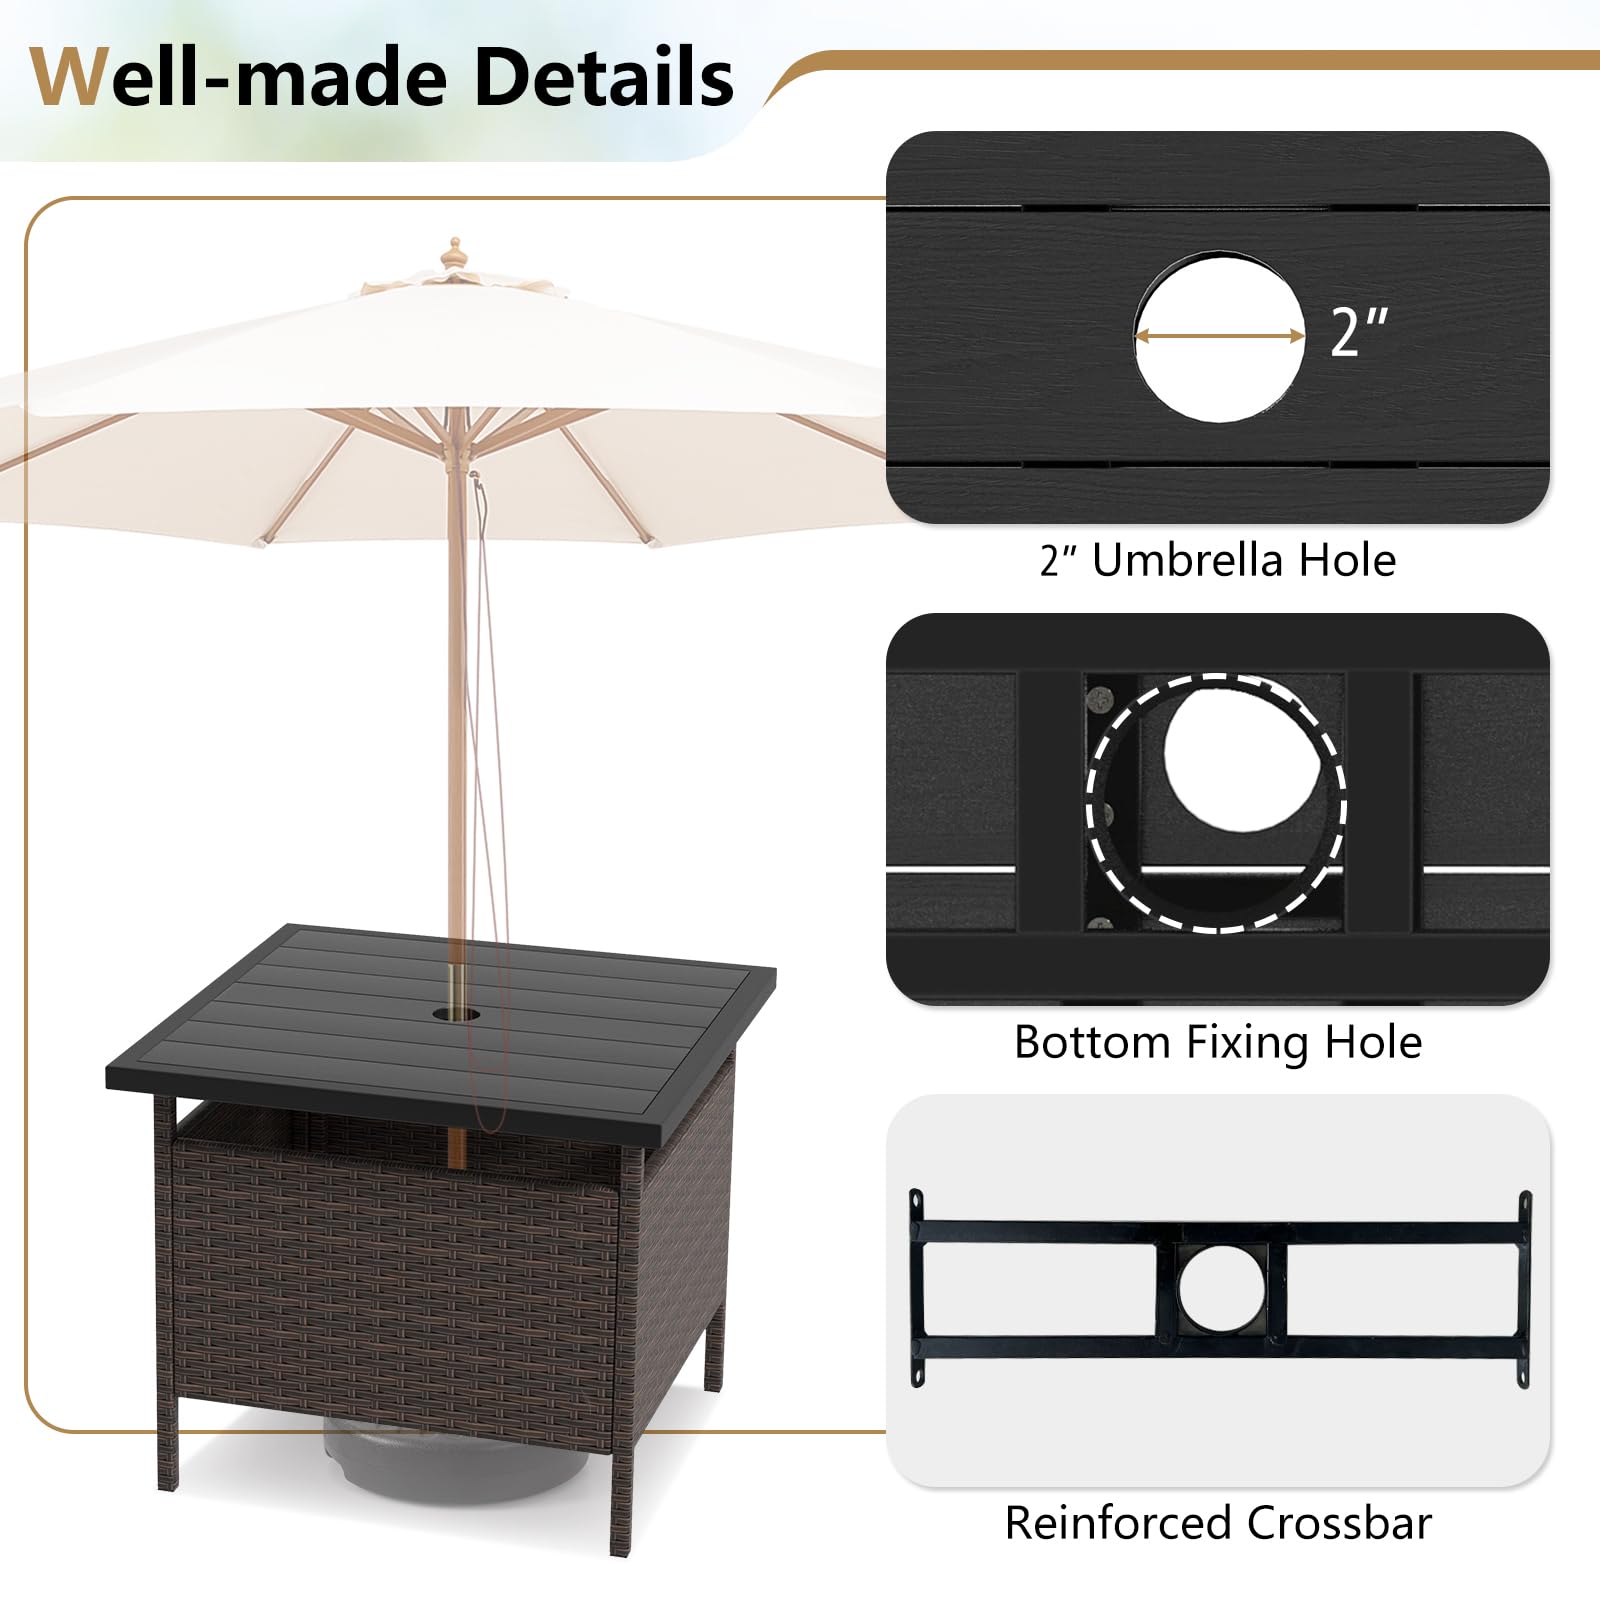 Giantex Umbrella Table, Outdoor Side Table with 2" Umbrella Hole, Rattan Umbrella Stand Holder Table